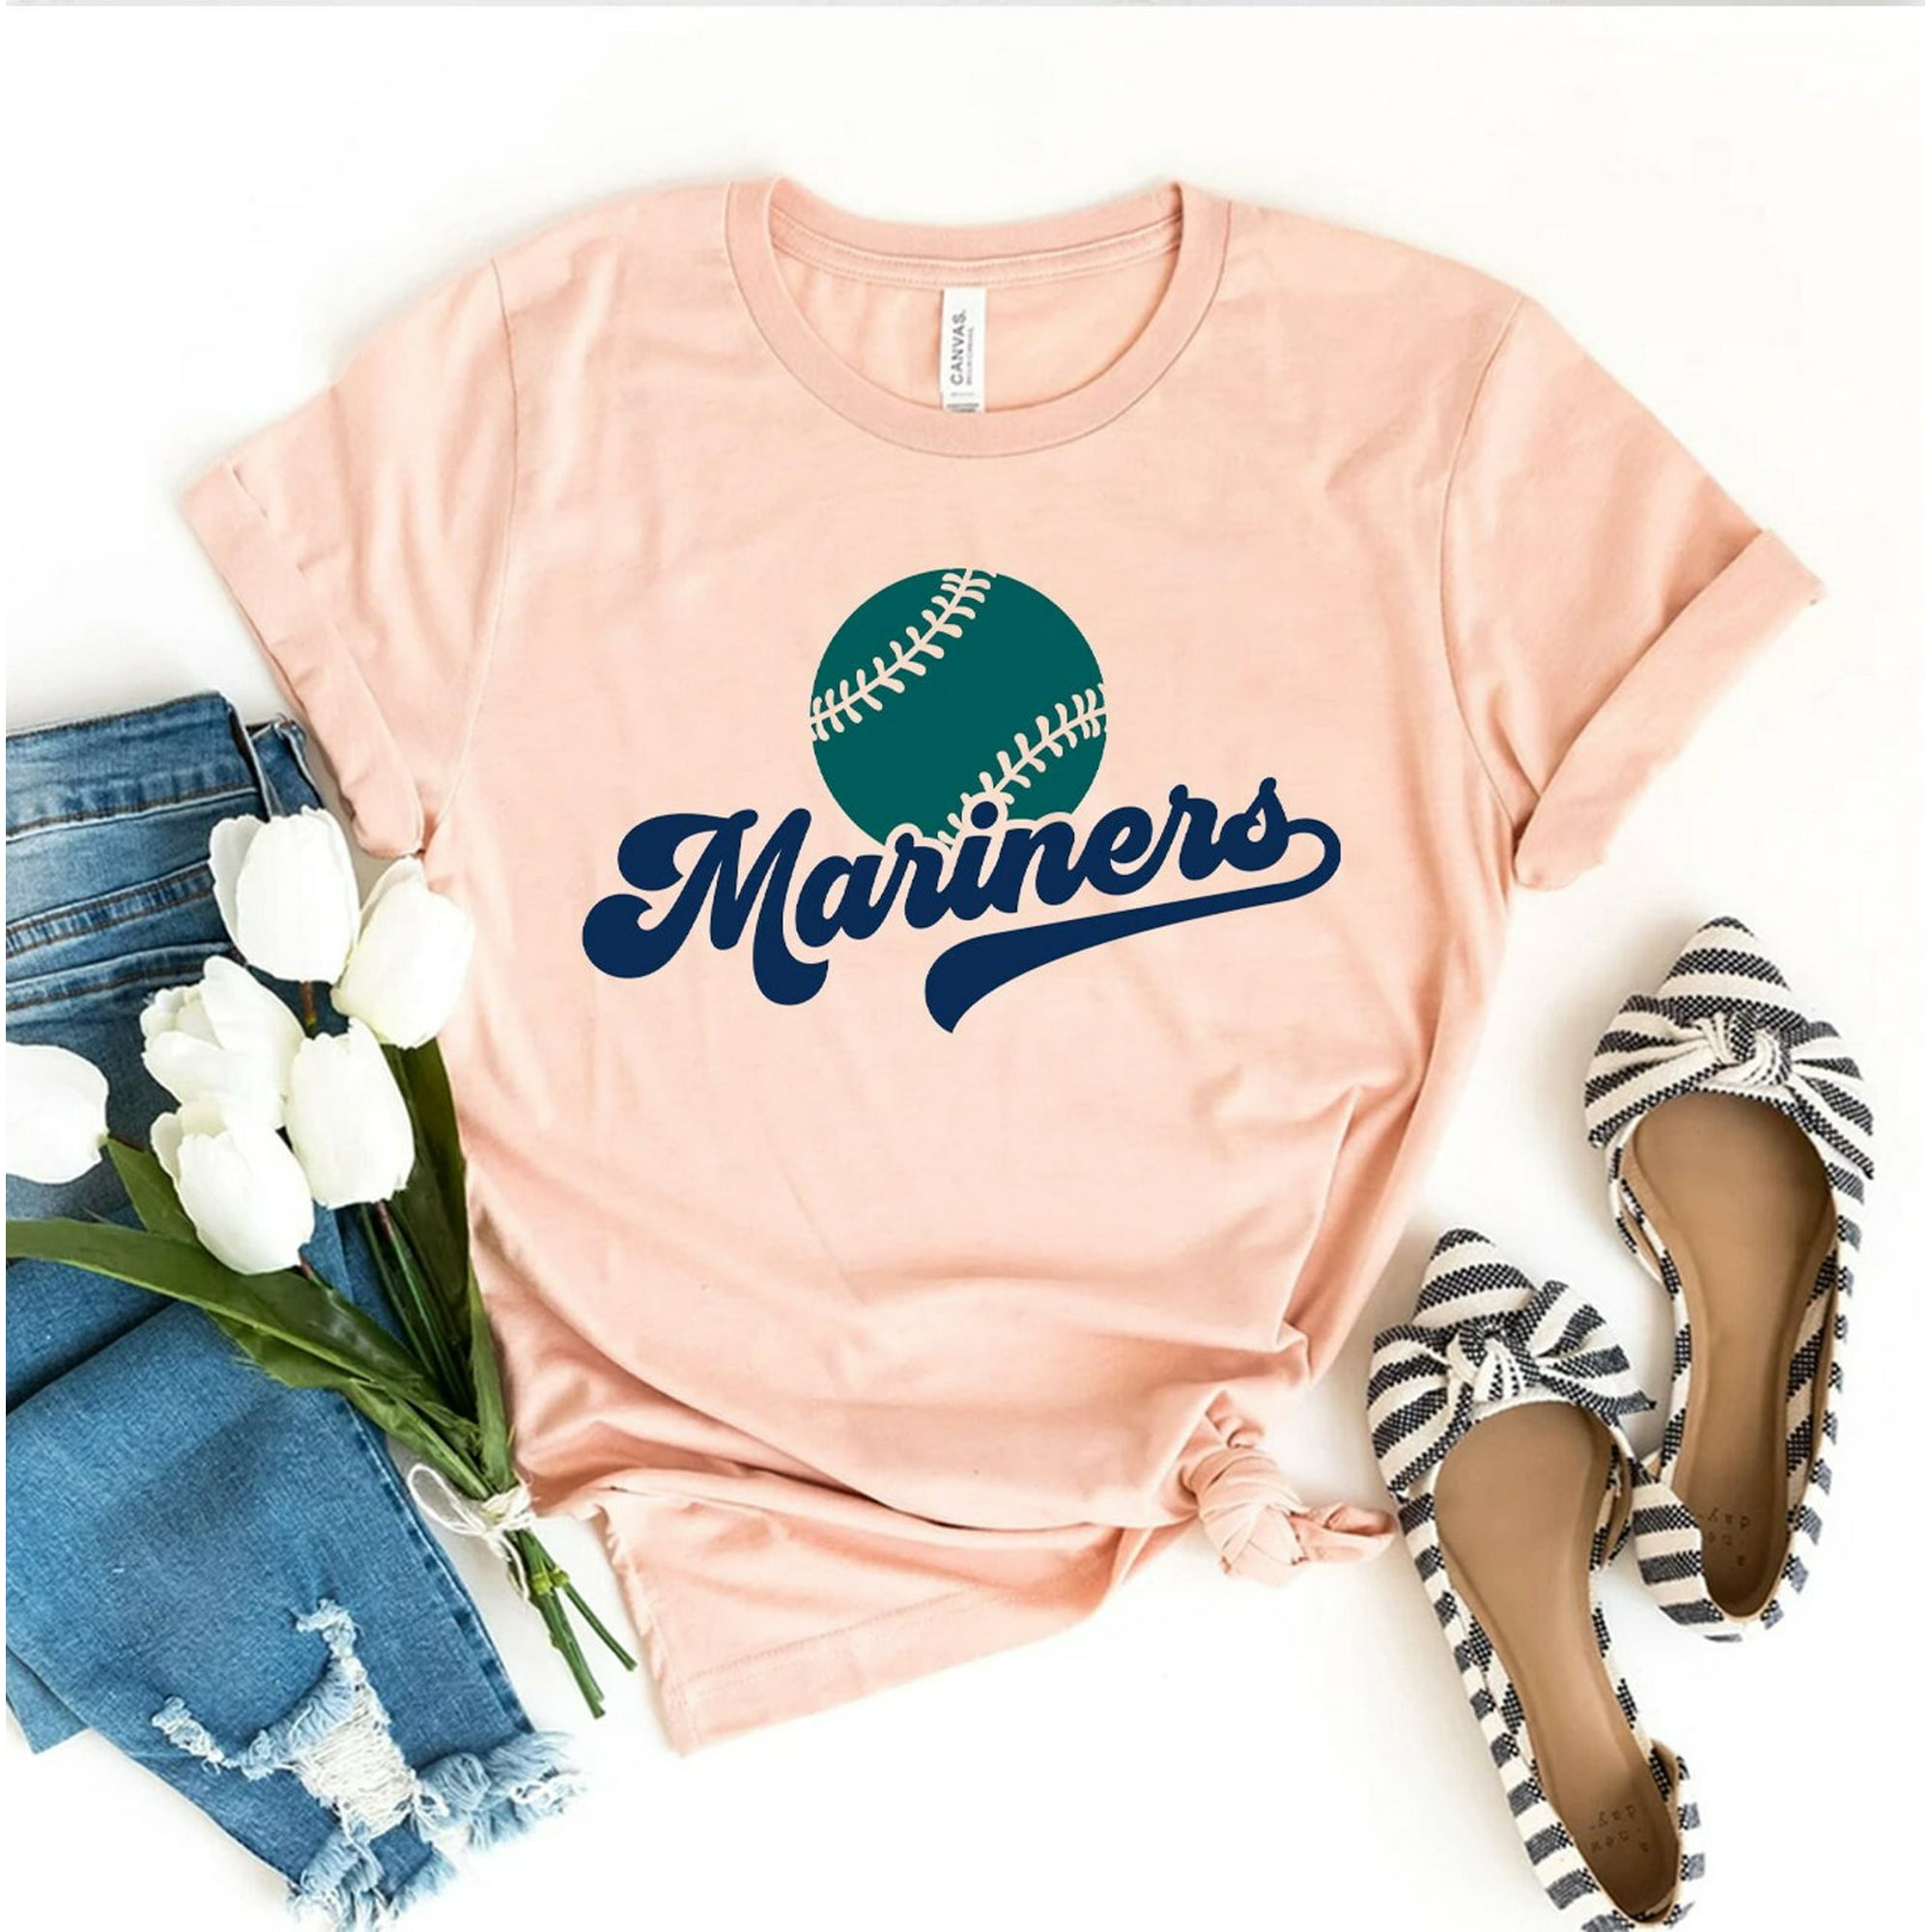 JaneseApparel Mariners Baseball T-Shirt Champions Shirt Game Day Tee Fan Top Gift Inspired Shirts Retro Love Dad Mom Mother's Father's, Women's, Size